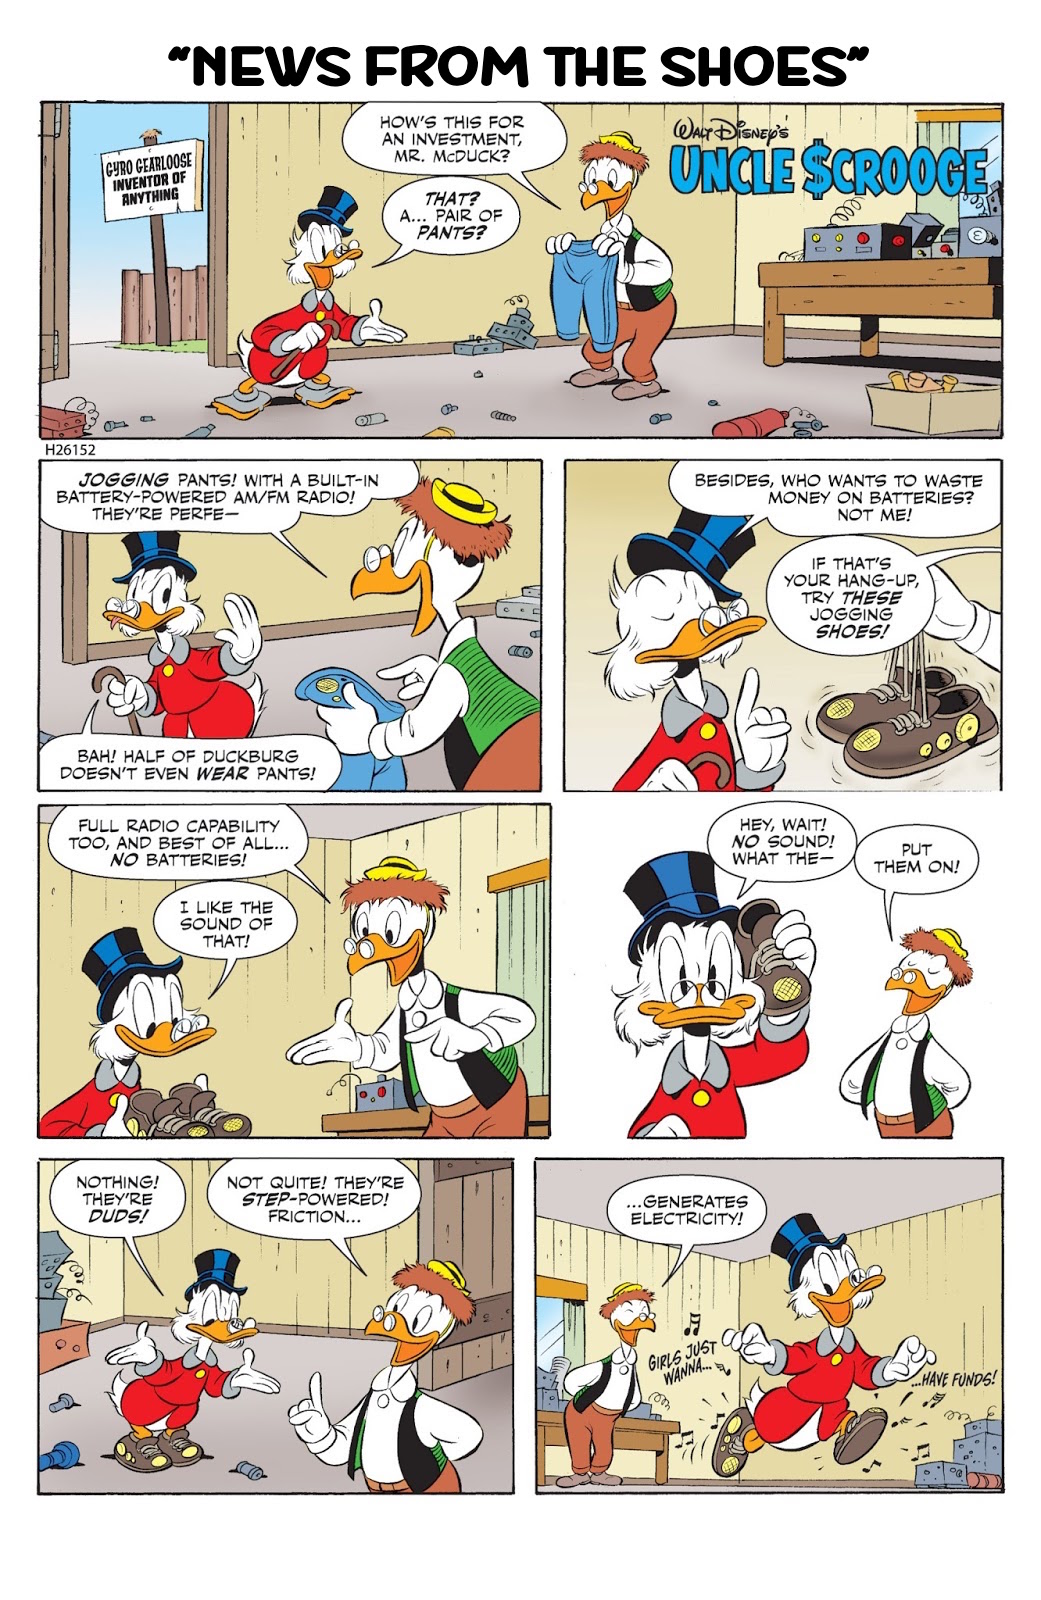 News from the Shoes | Scrooge McDuck Wikia | Fandom